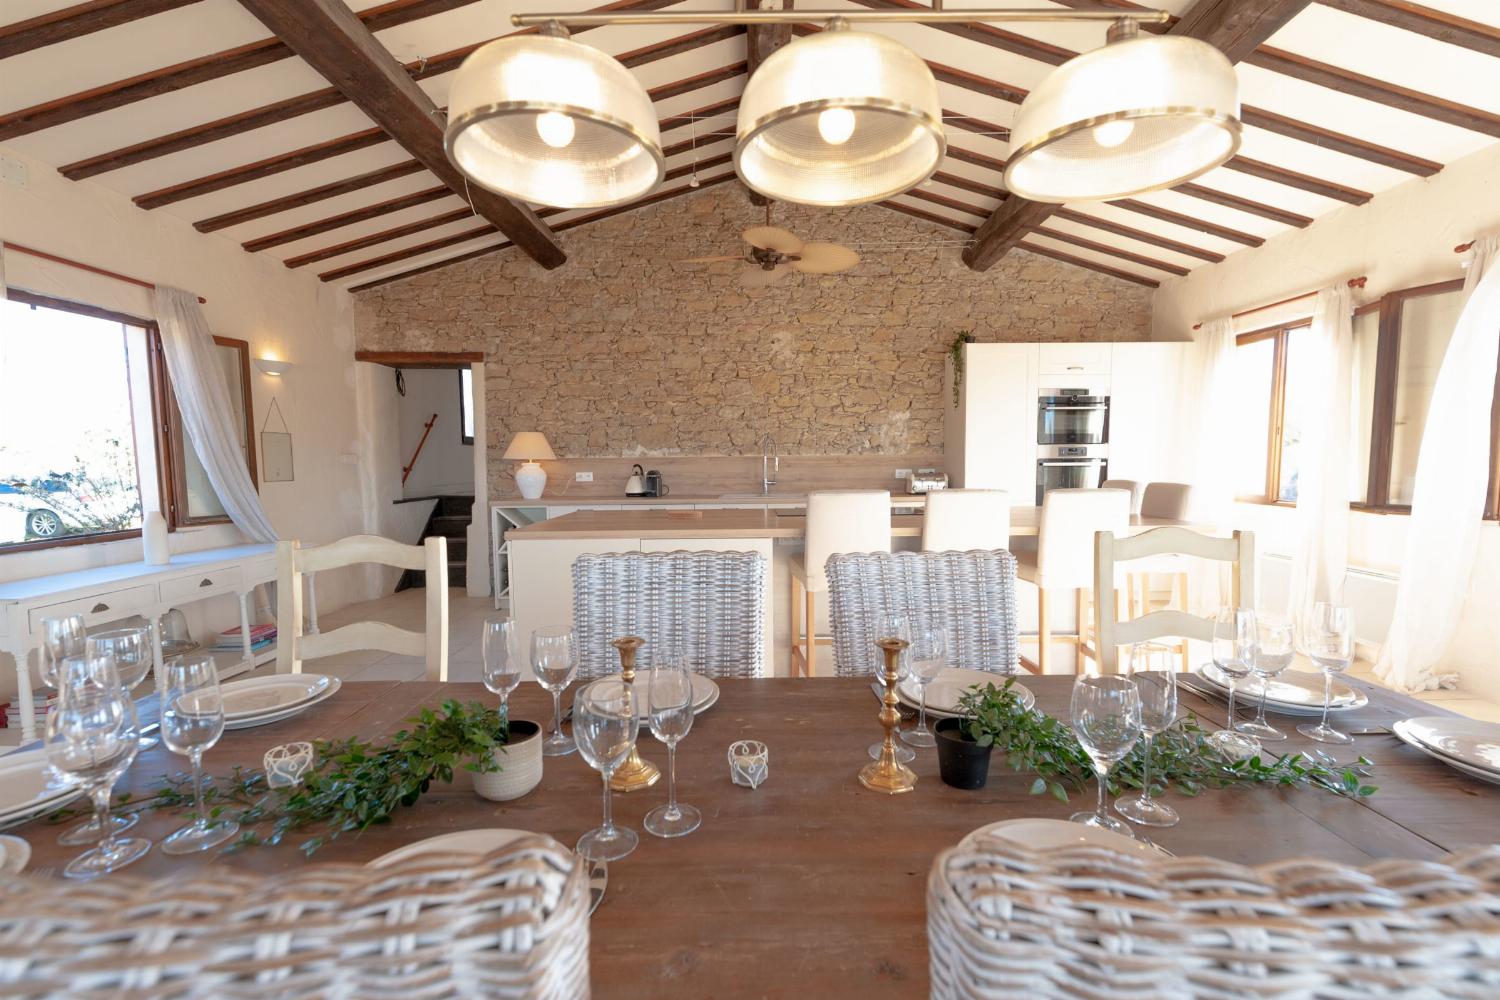 Dining room | Rental home in South of France